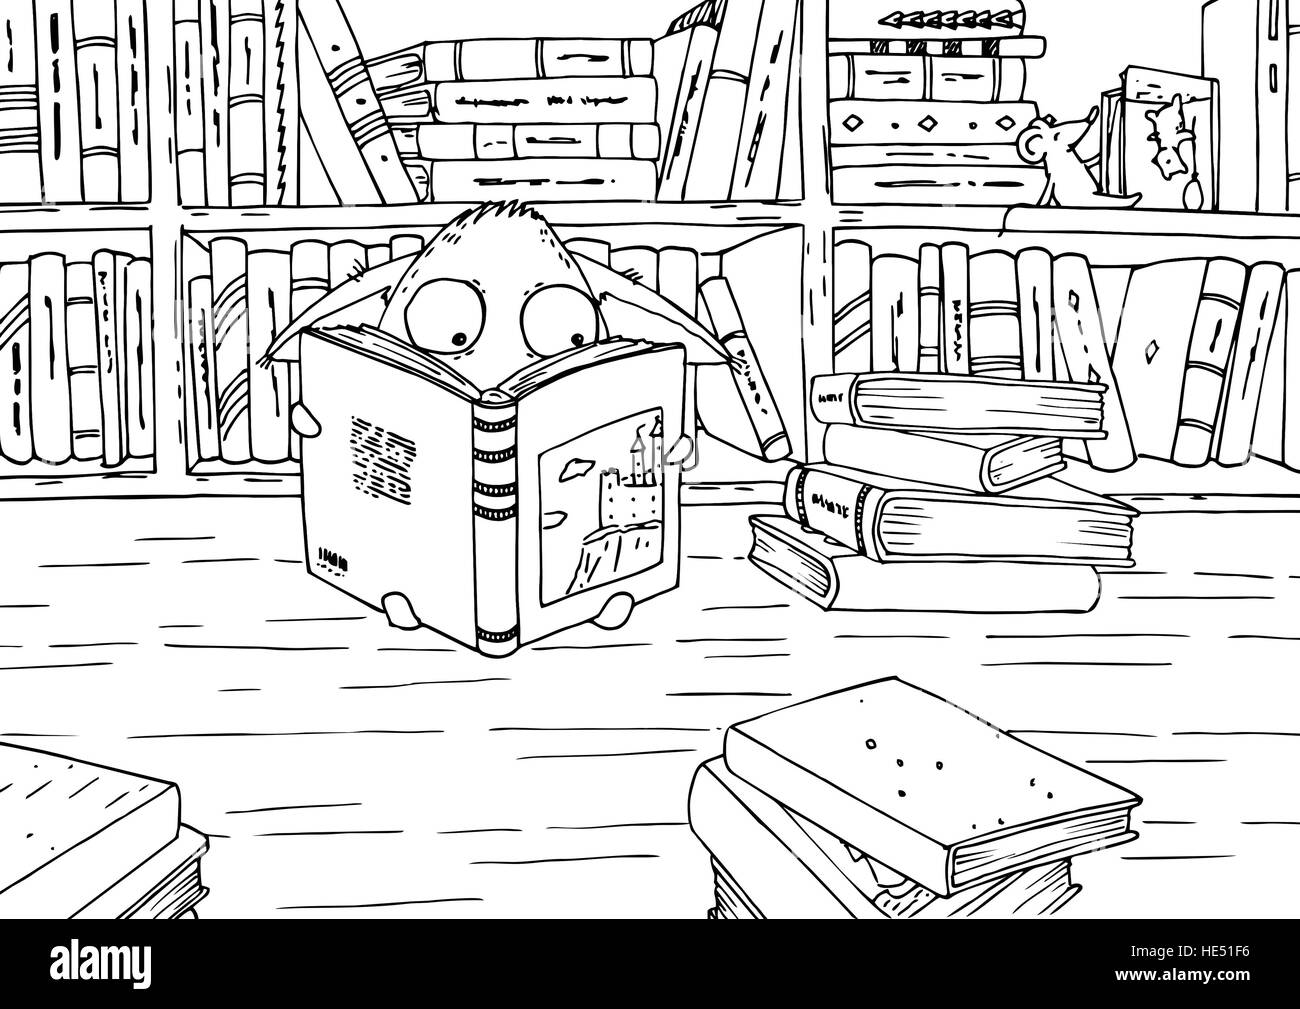 Coloring page for children. Little monster and his friend mouse reading books in library. Stock Photo